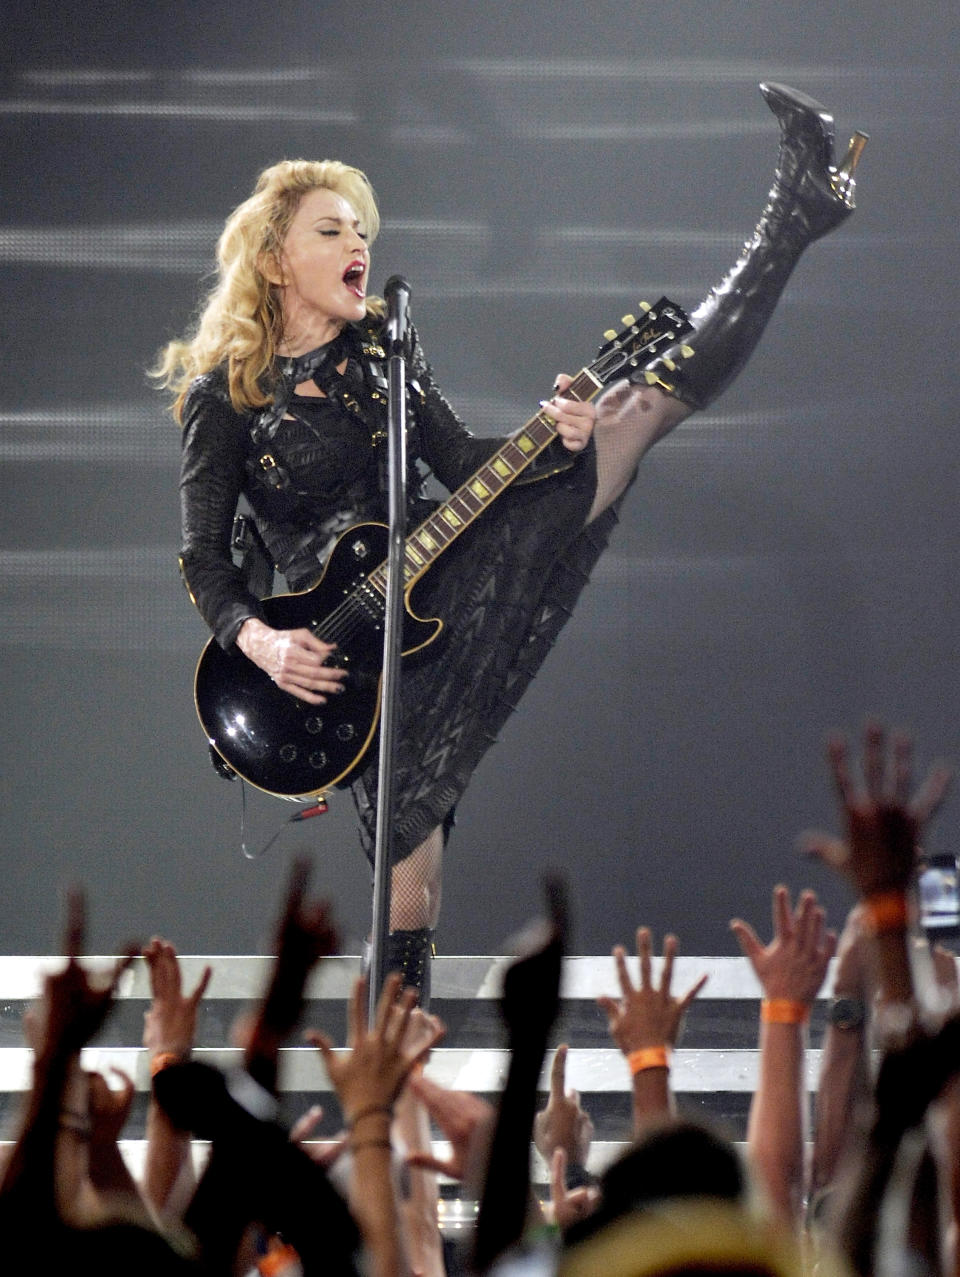 Singer Madonna performs at the Wells Fargo Center on Tuesday Aug. 28, 2012 in Philadelphia. (Photo by Evan Agostini/Invision/AP)